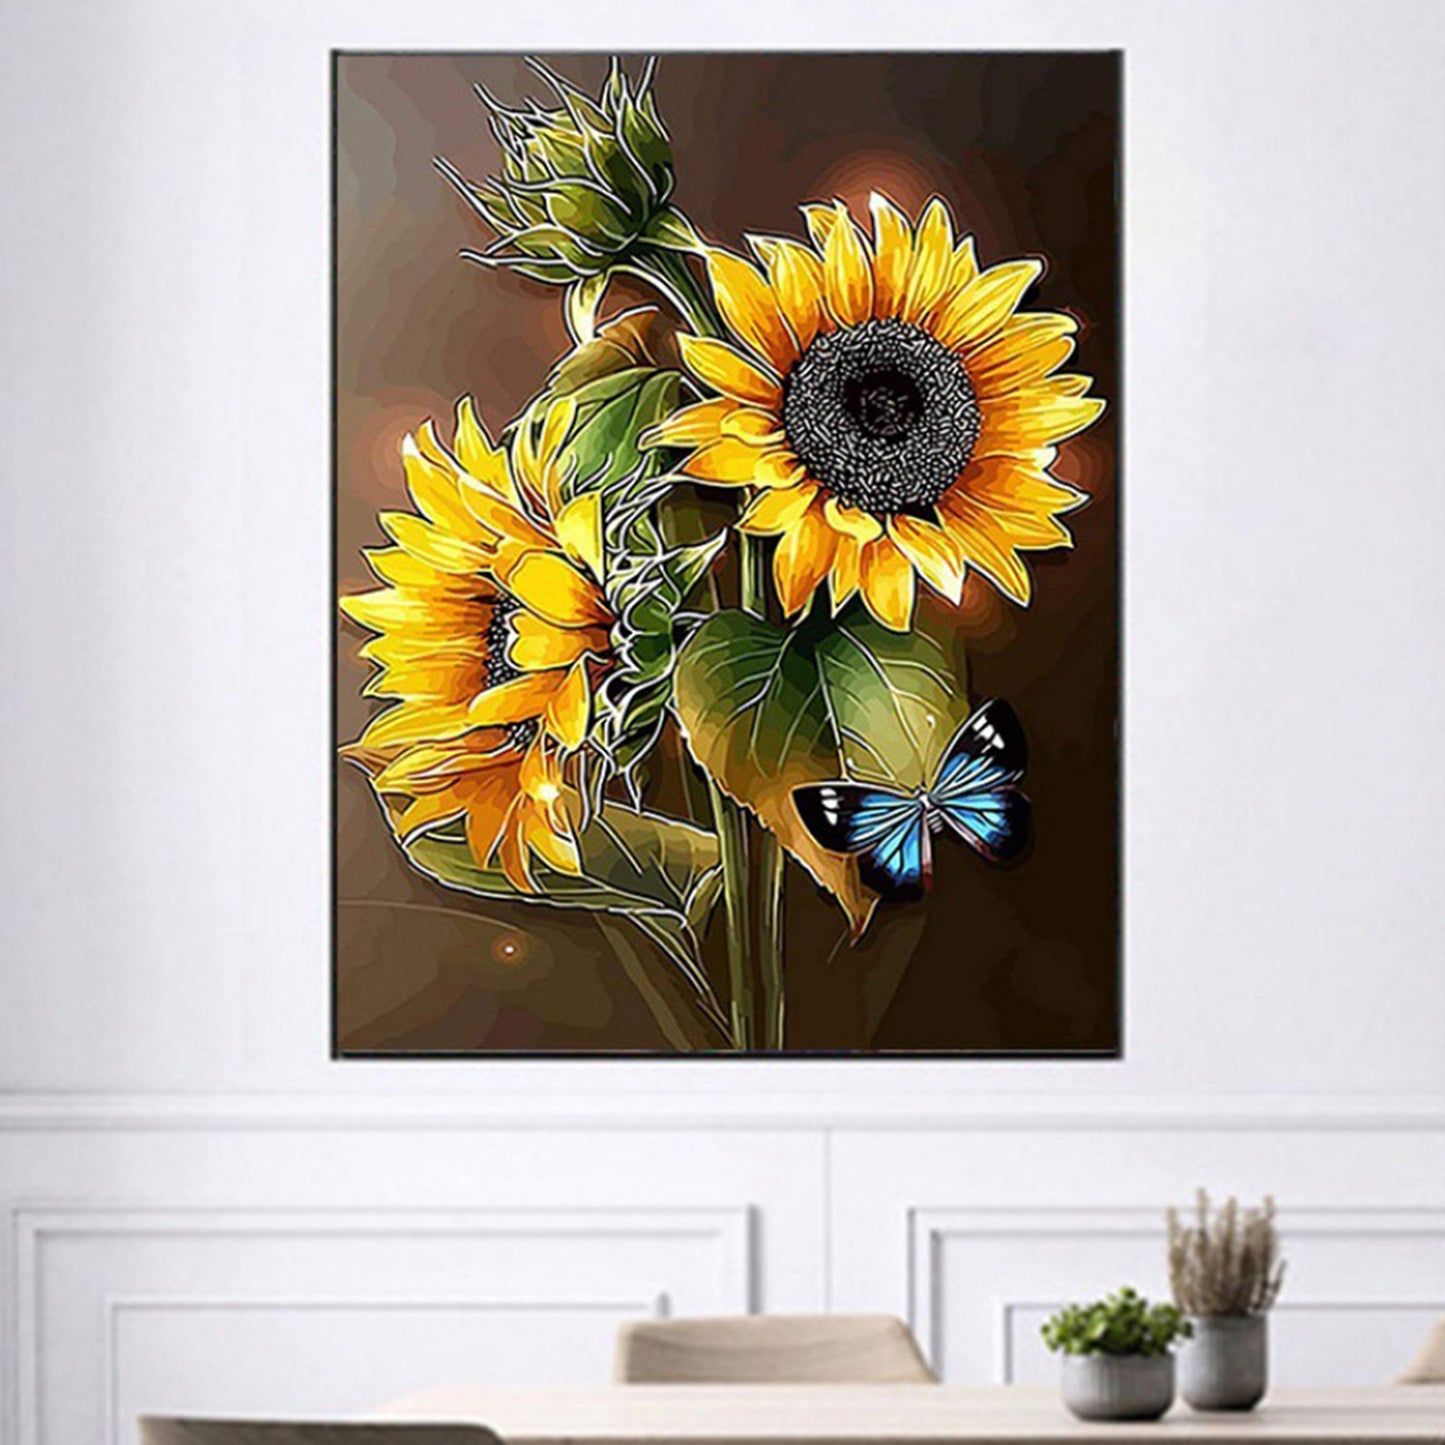 5D Diamond Drawing Kit Sunflower for Butterfly DIY Art Drawing Picture Set for Adults Beginners Handmade Home Wall Decoration Supplies